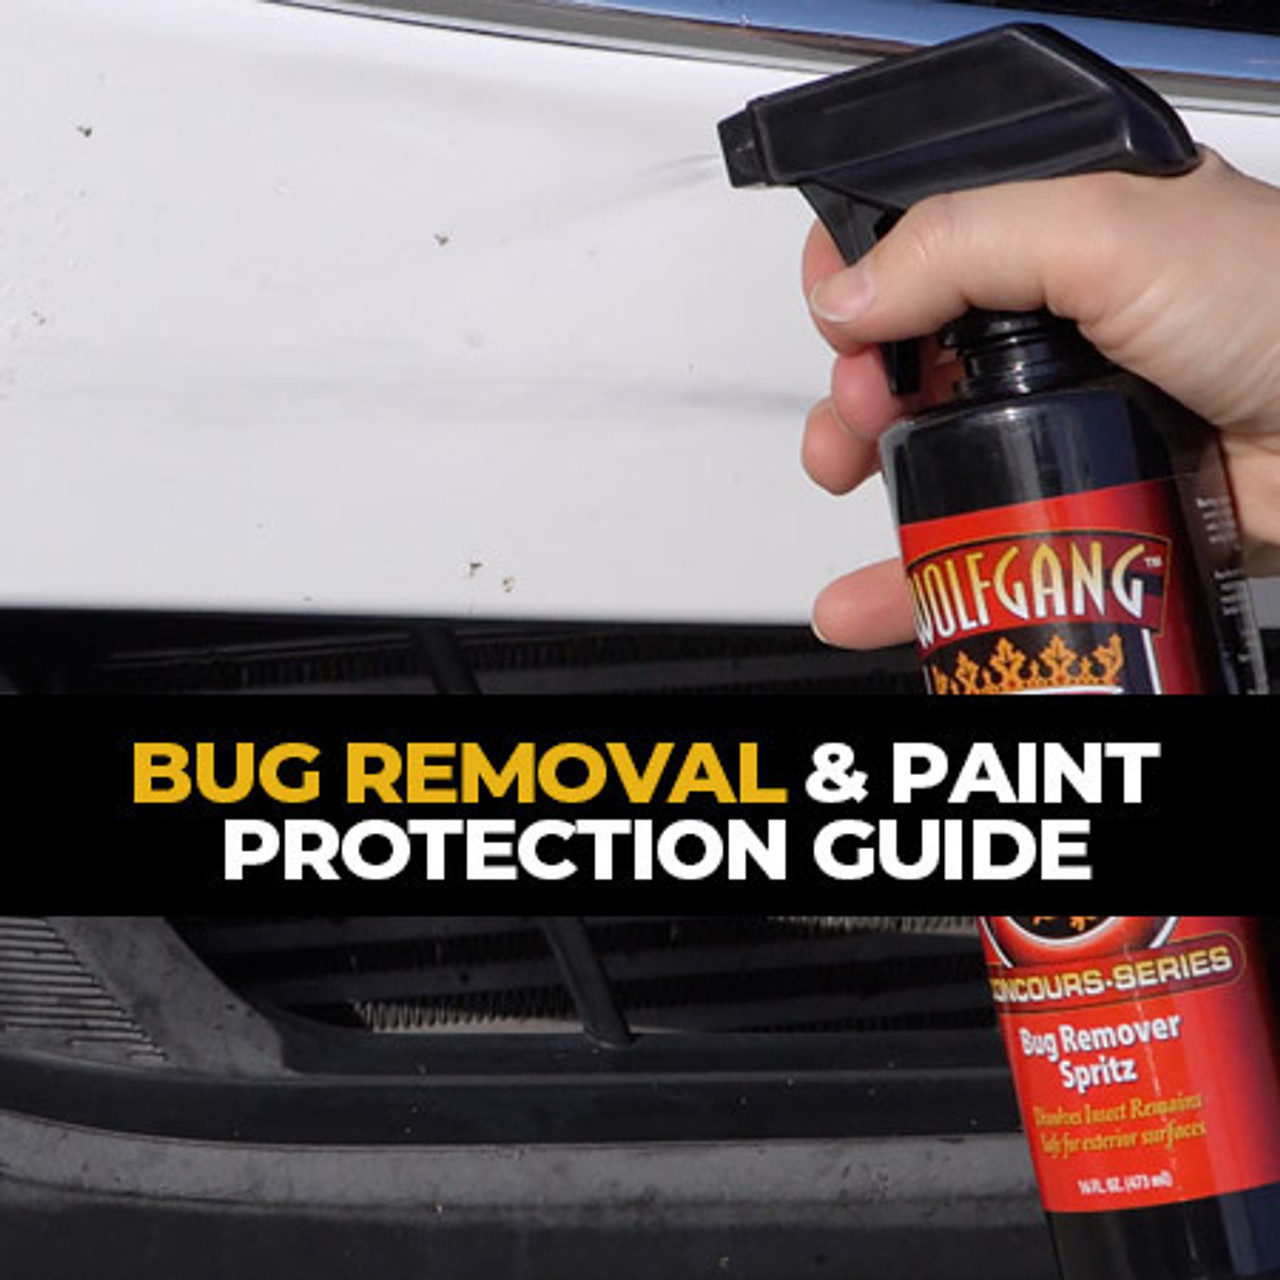 Wolfgang Bug Removal & Paint Protection Guide